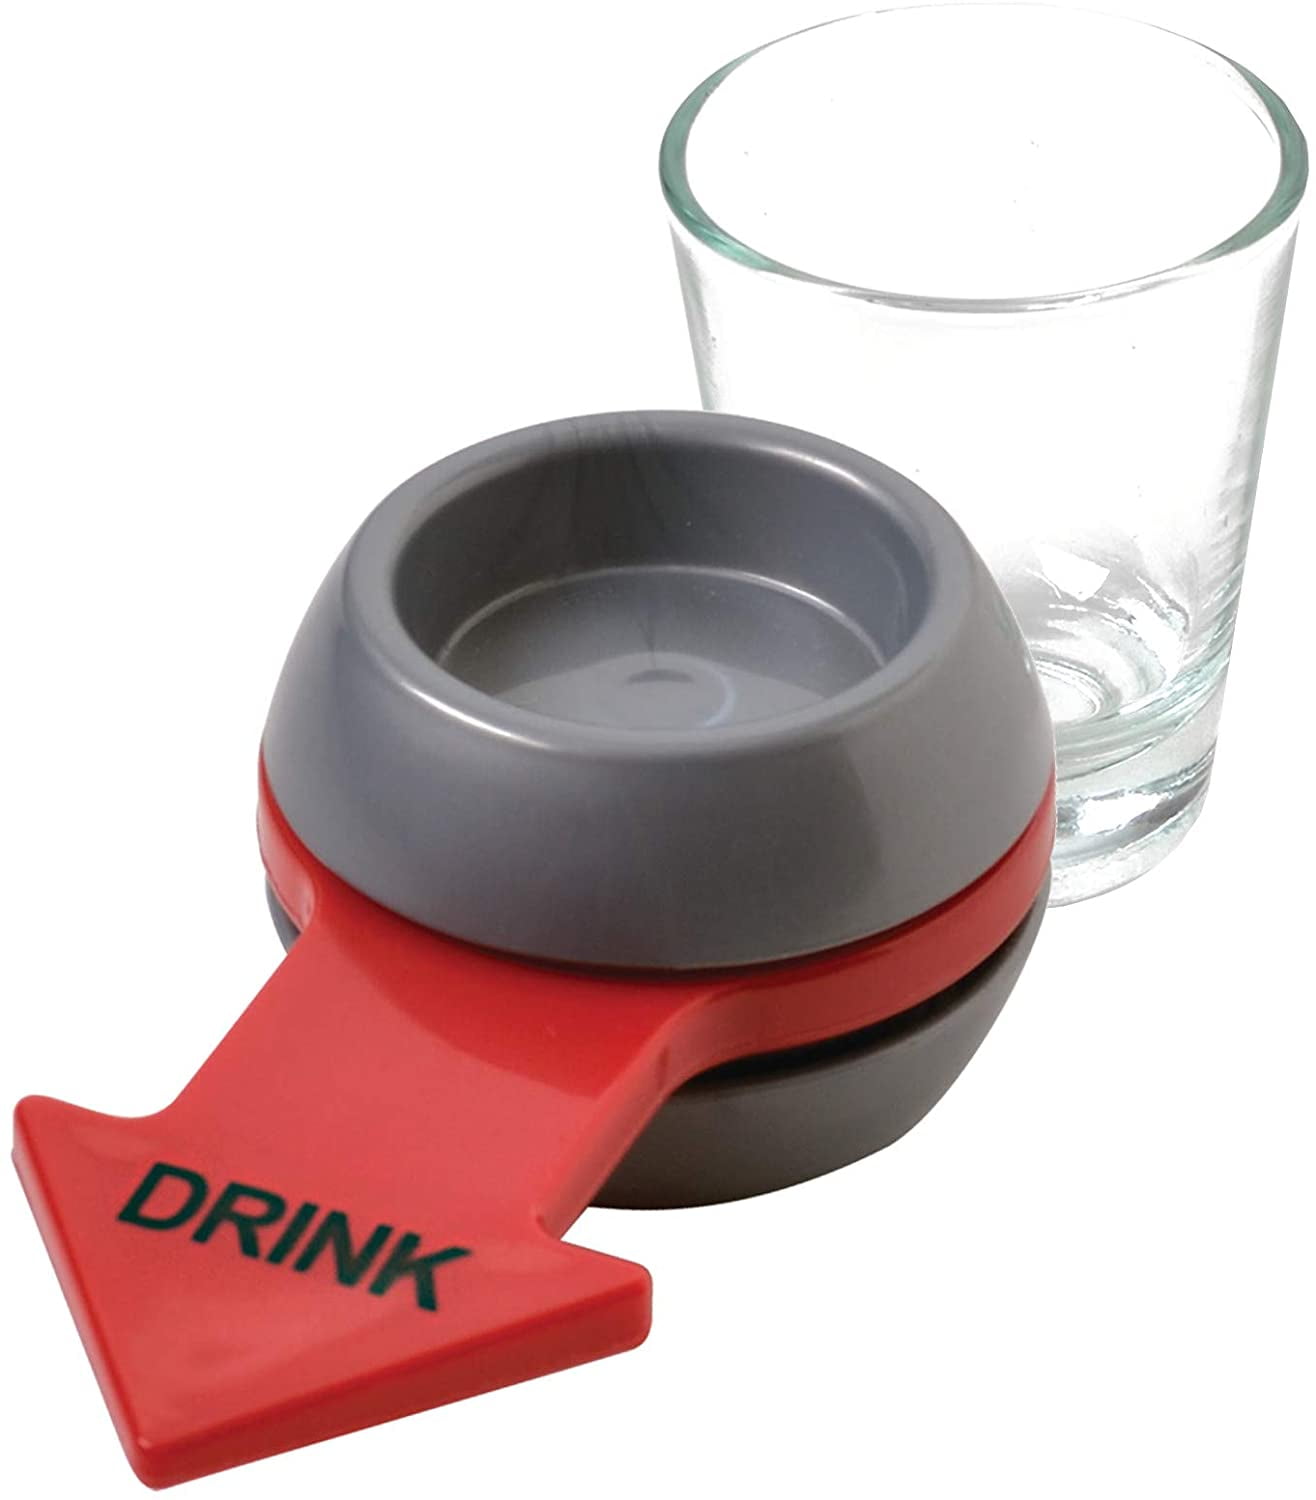 Spin the Shot Drinking Game